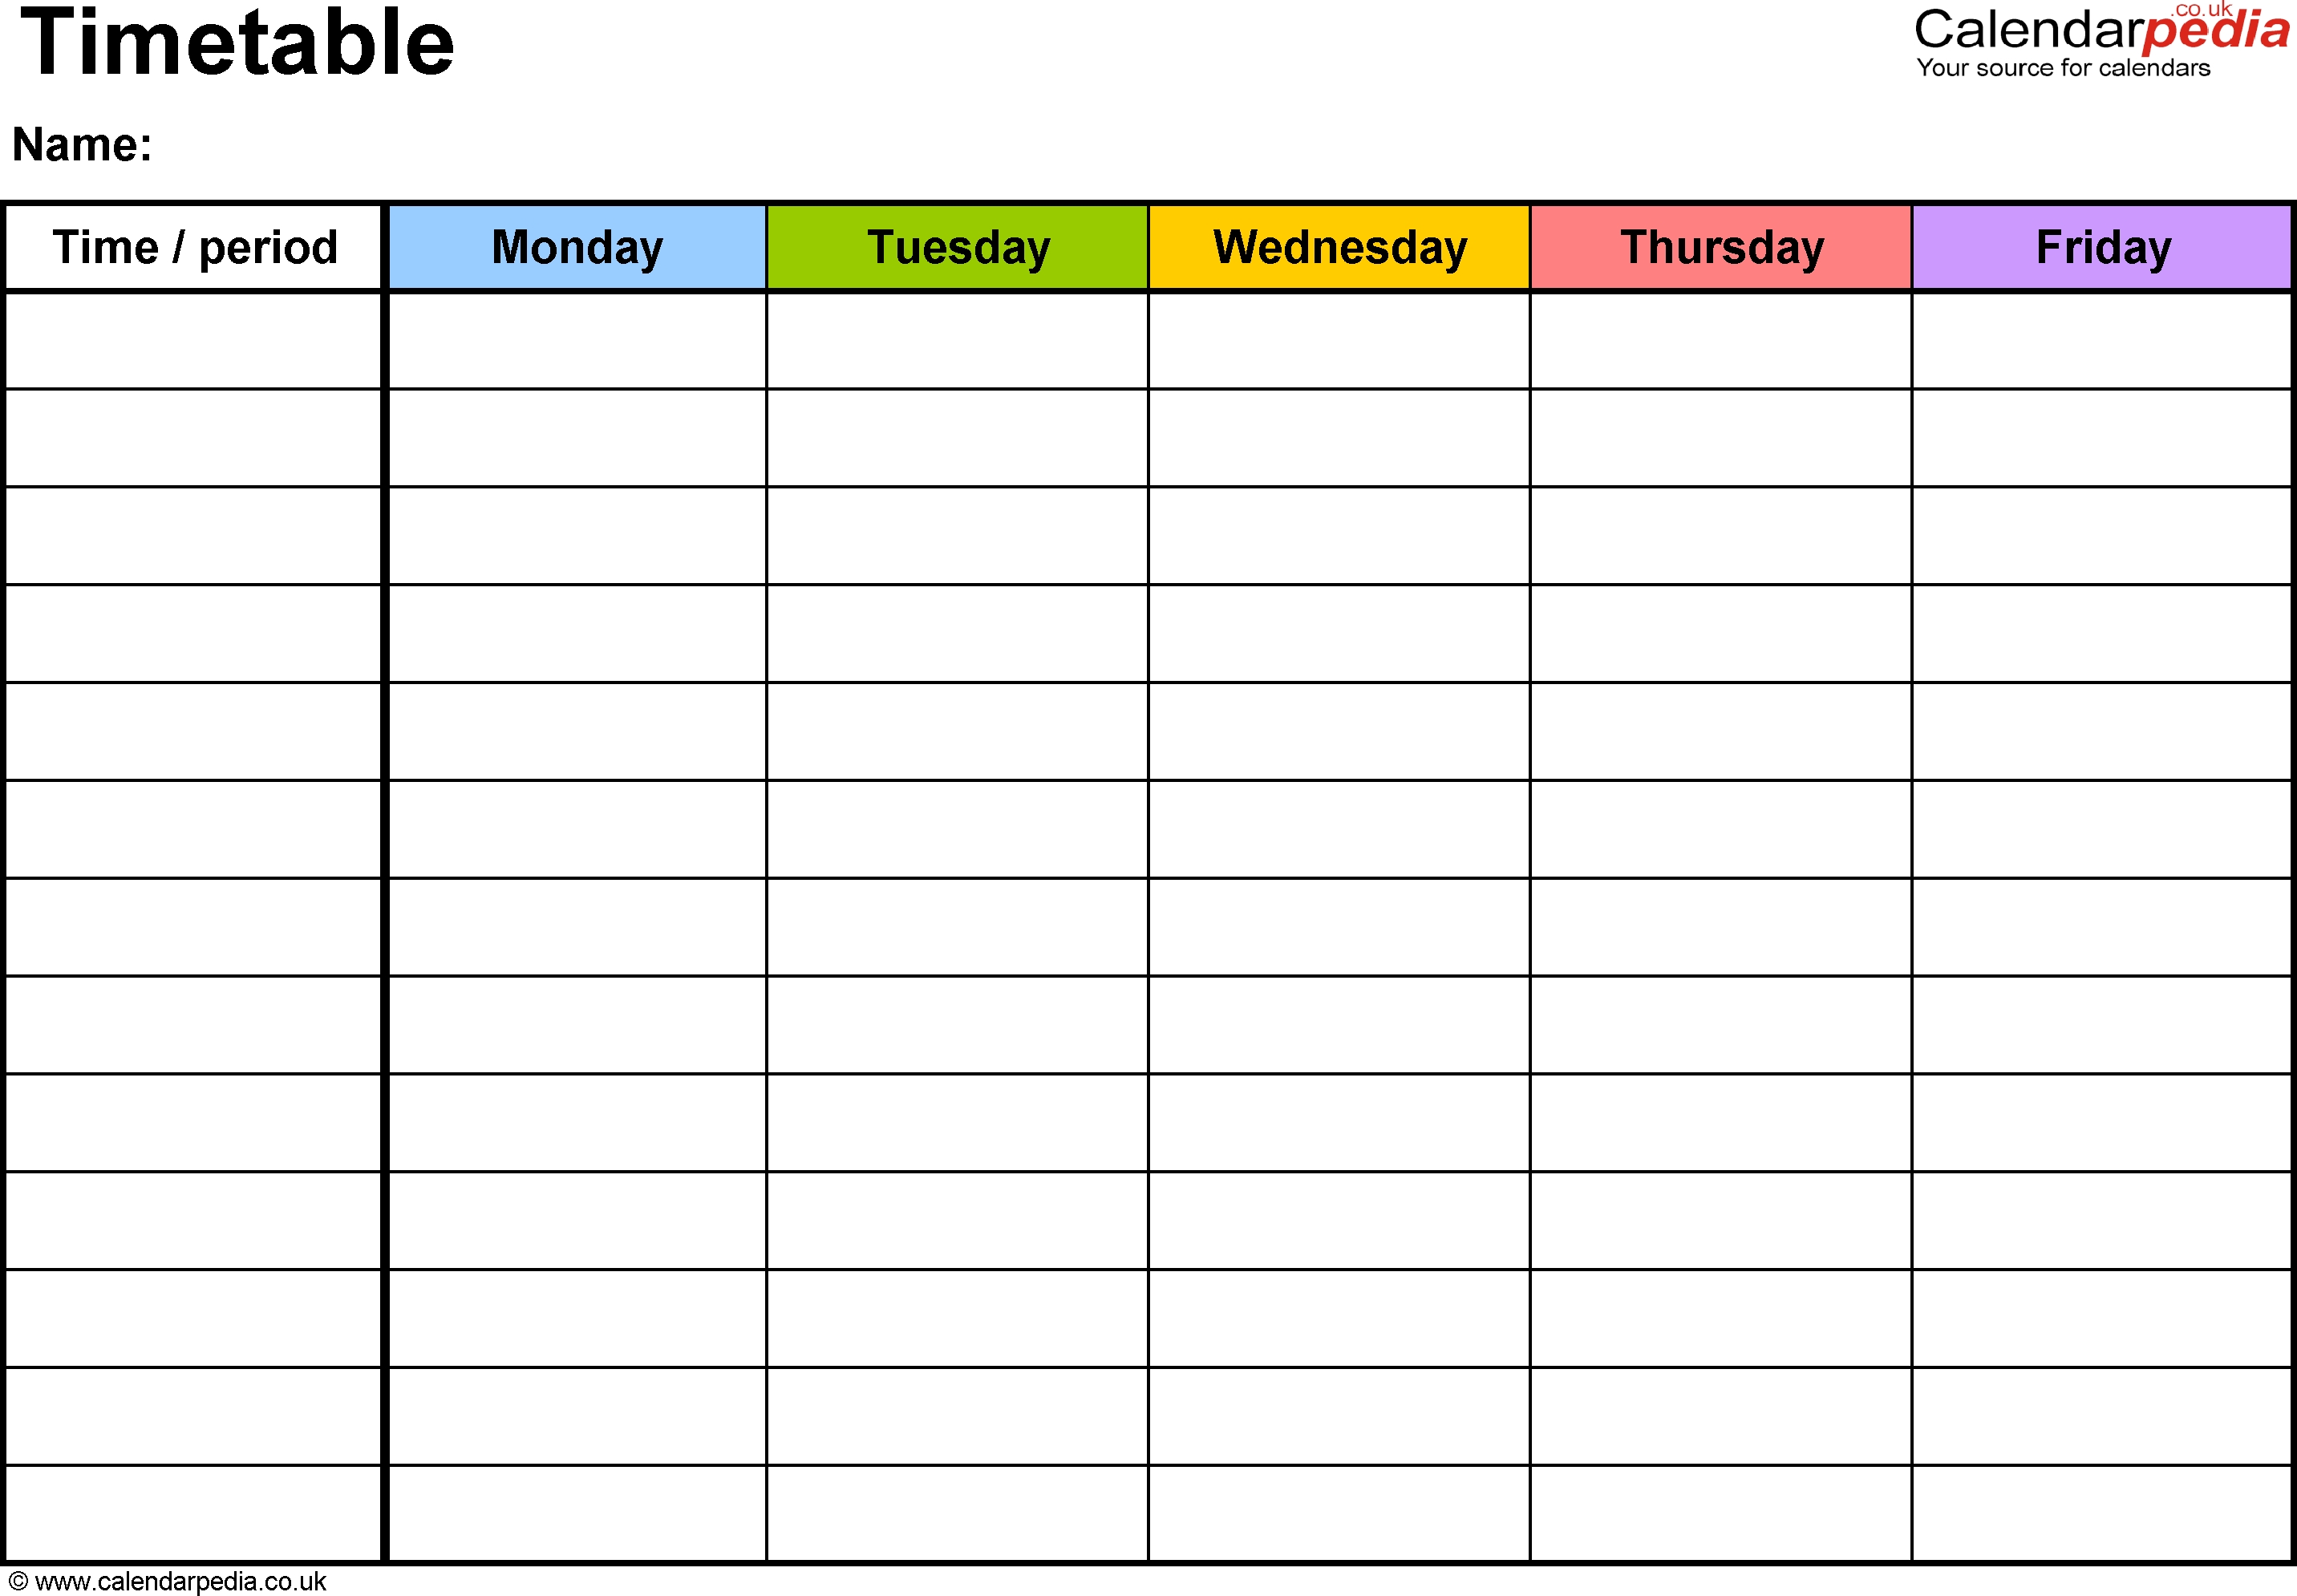 Pdf Timetable Template 2: Landscape Format, A4, 1 Page-Monday - Friday Timetable Template